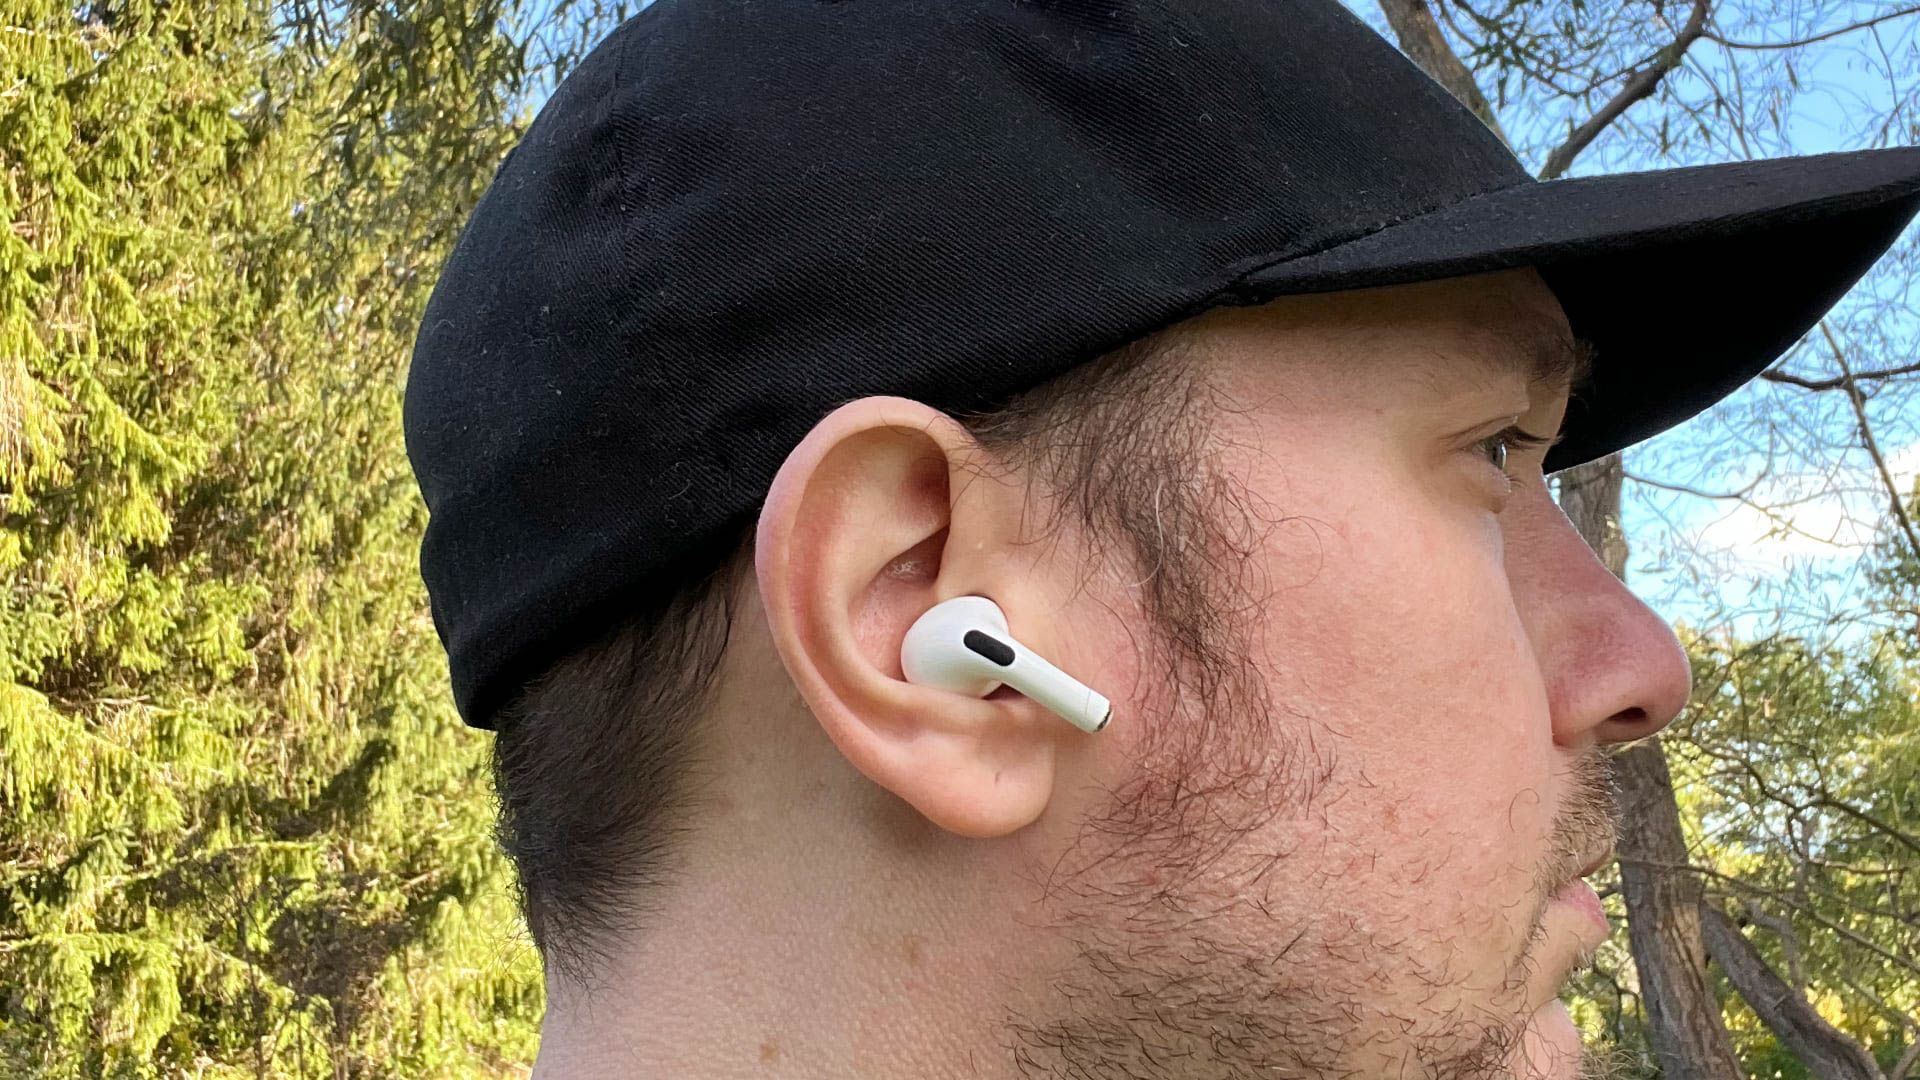 Wearing the 2nd generation AirPods Pro outside near a hedge.